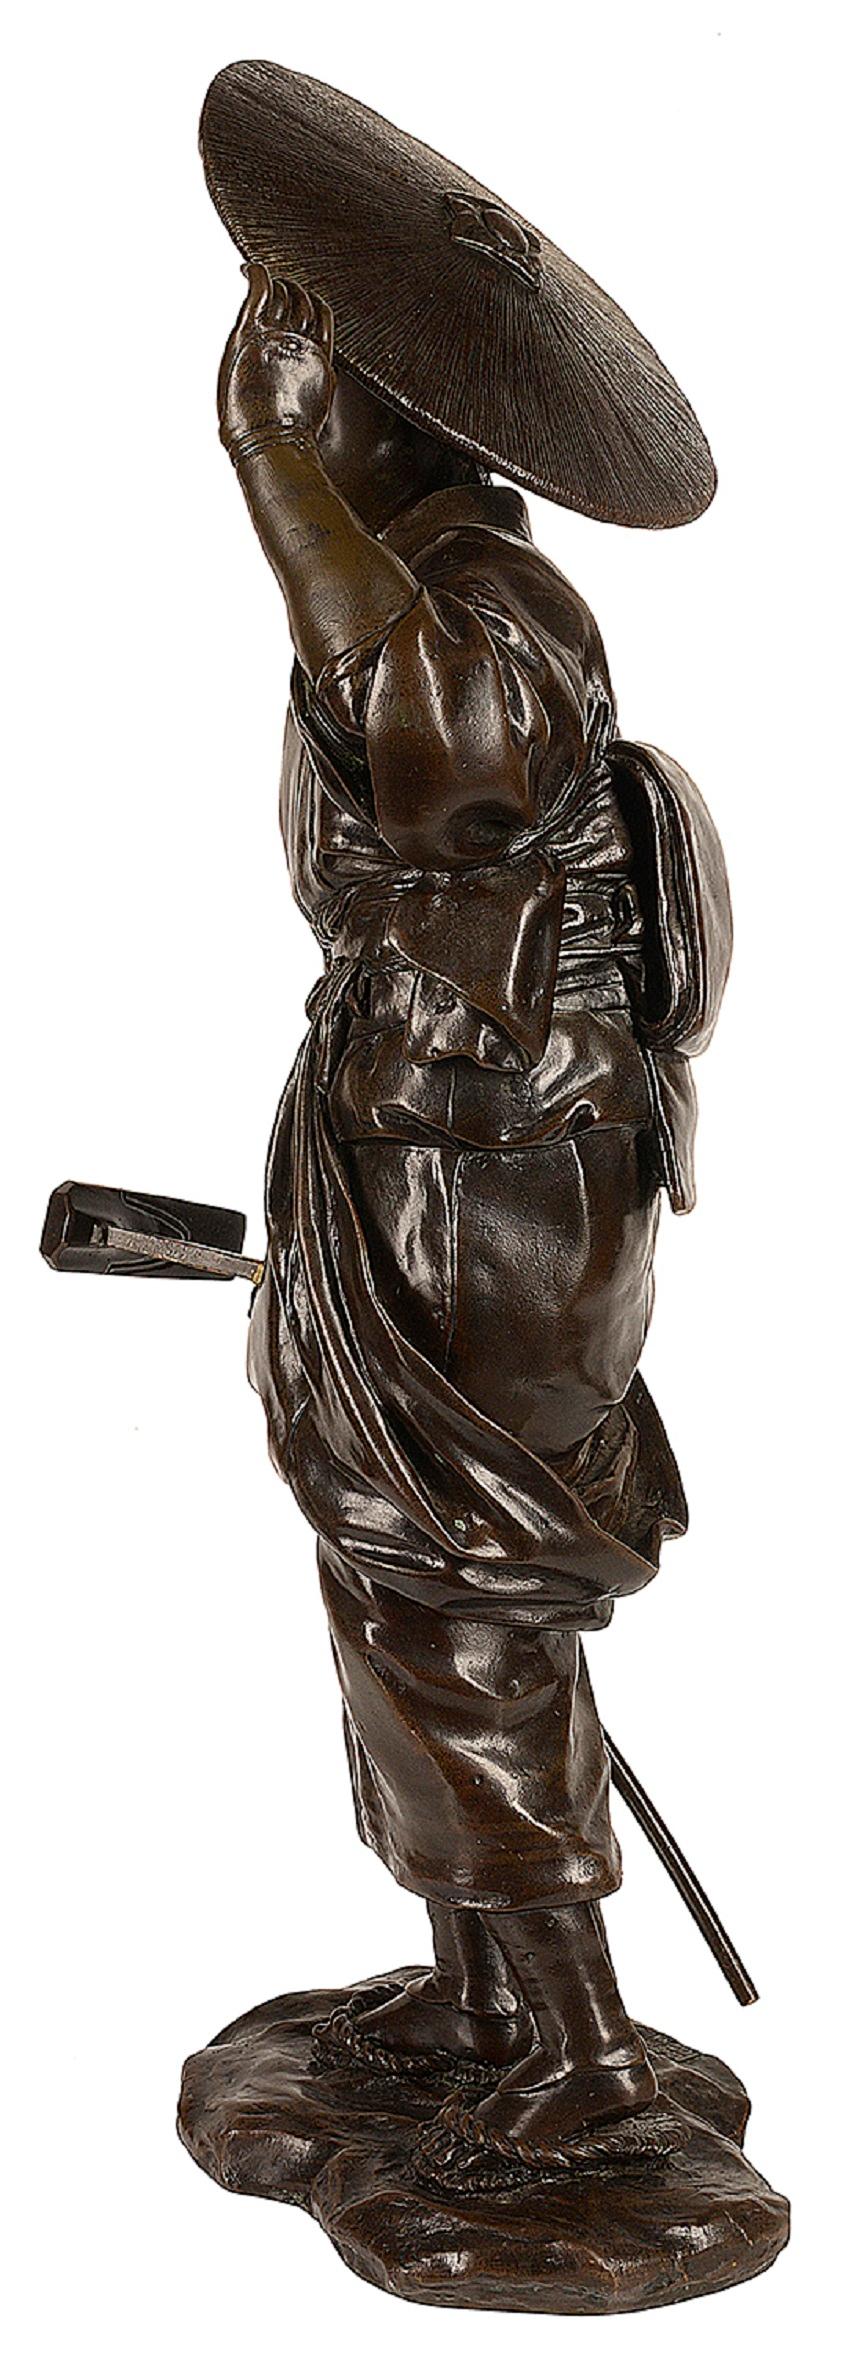 A very good quality late 19th Century (Meiji period 1868-1912) Japanese bronze statue of a farm girl holding a Hoe and wearing a wide brimmed wicker hat.
Signed on the base.